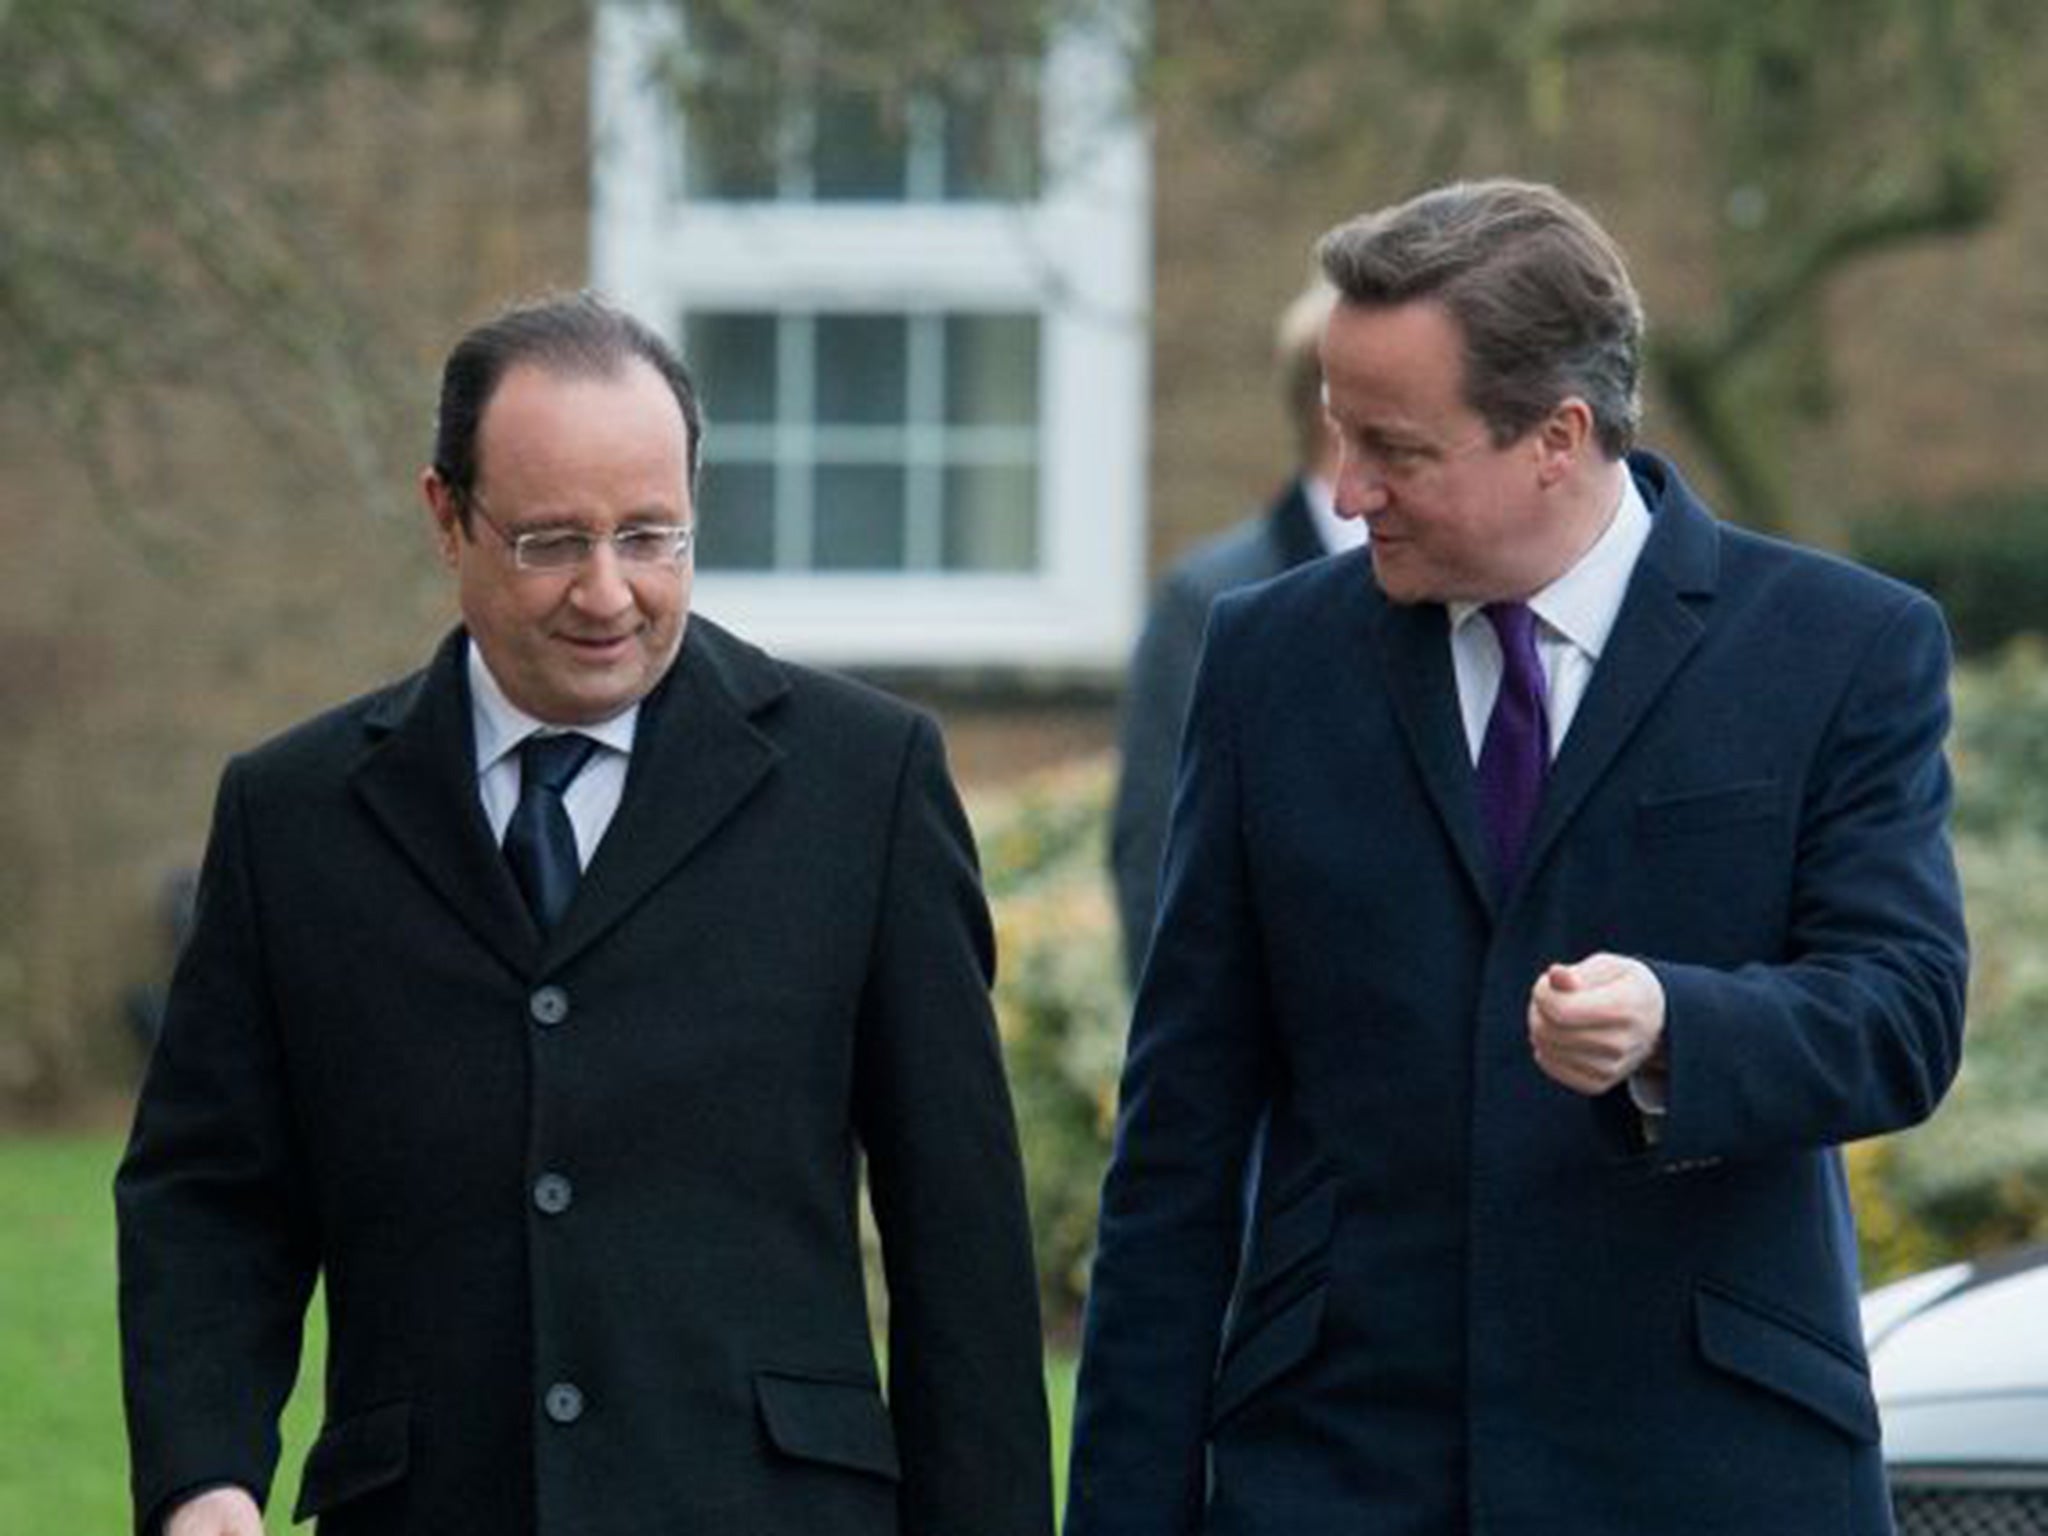 Prime Minister David Cameron walking with French President Francois Hollande